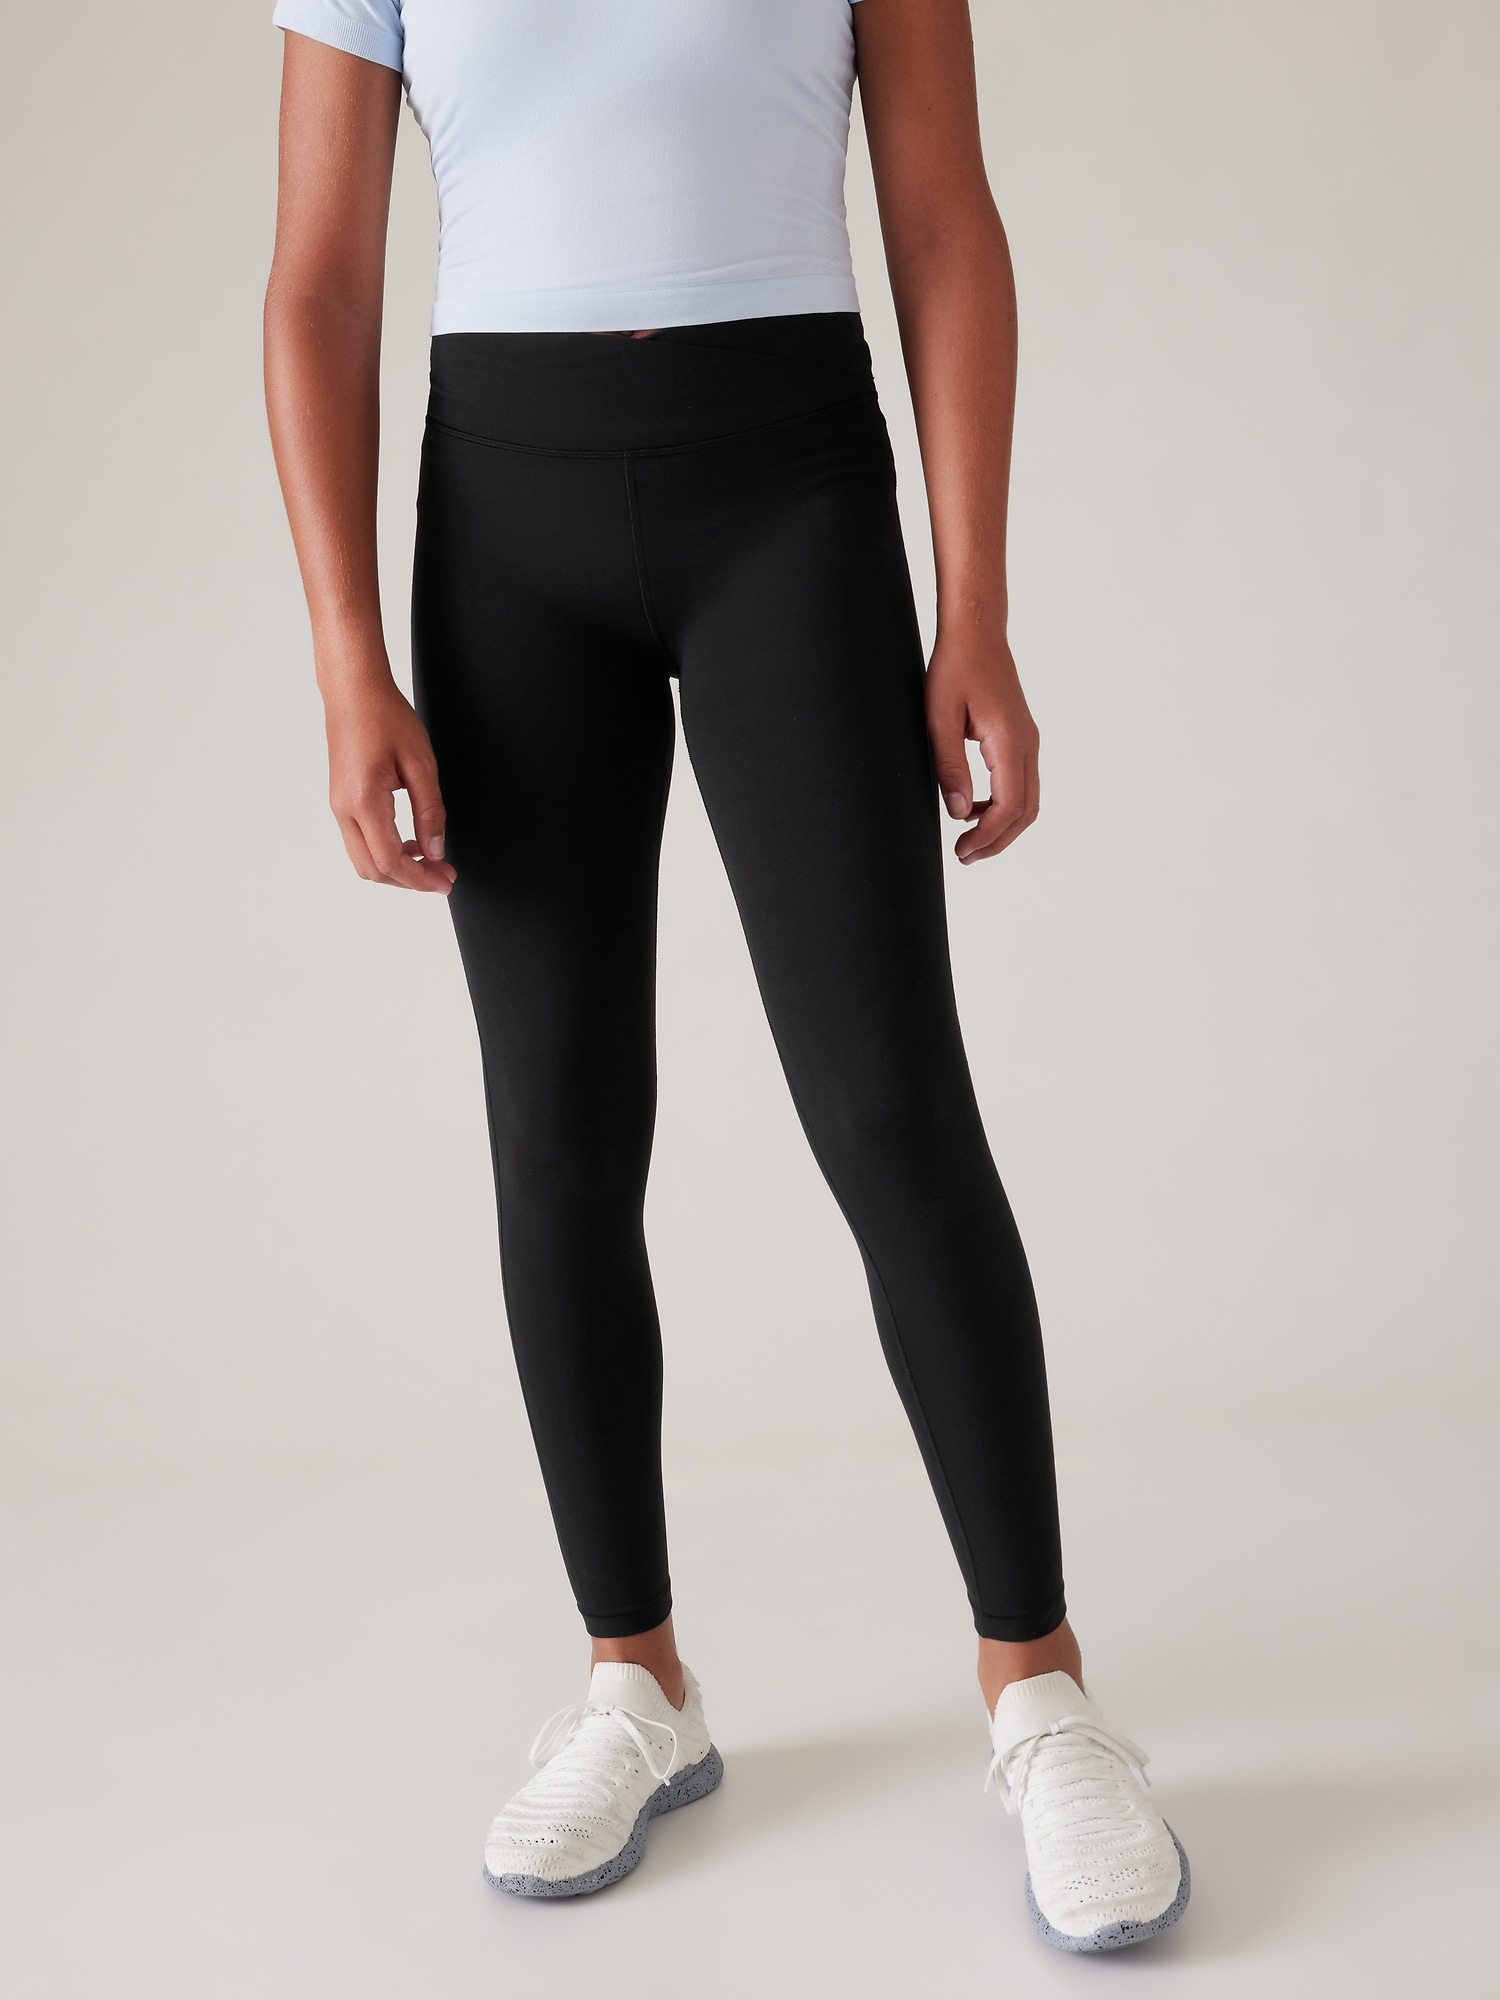 Believe Crossover Leggings – The Be Line Products